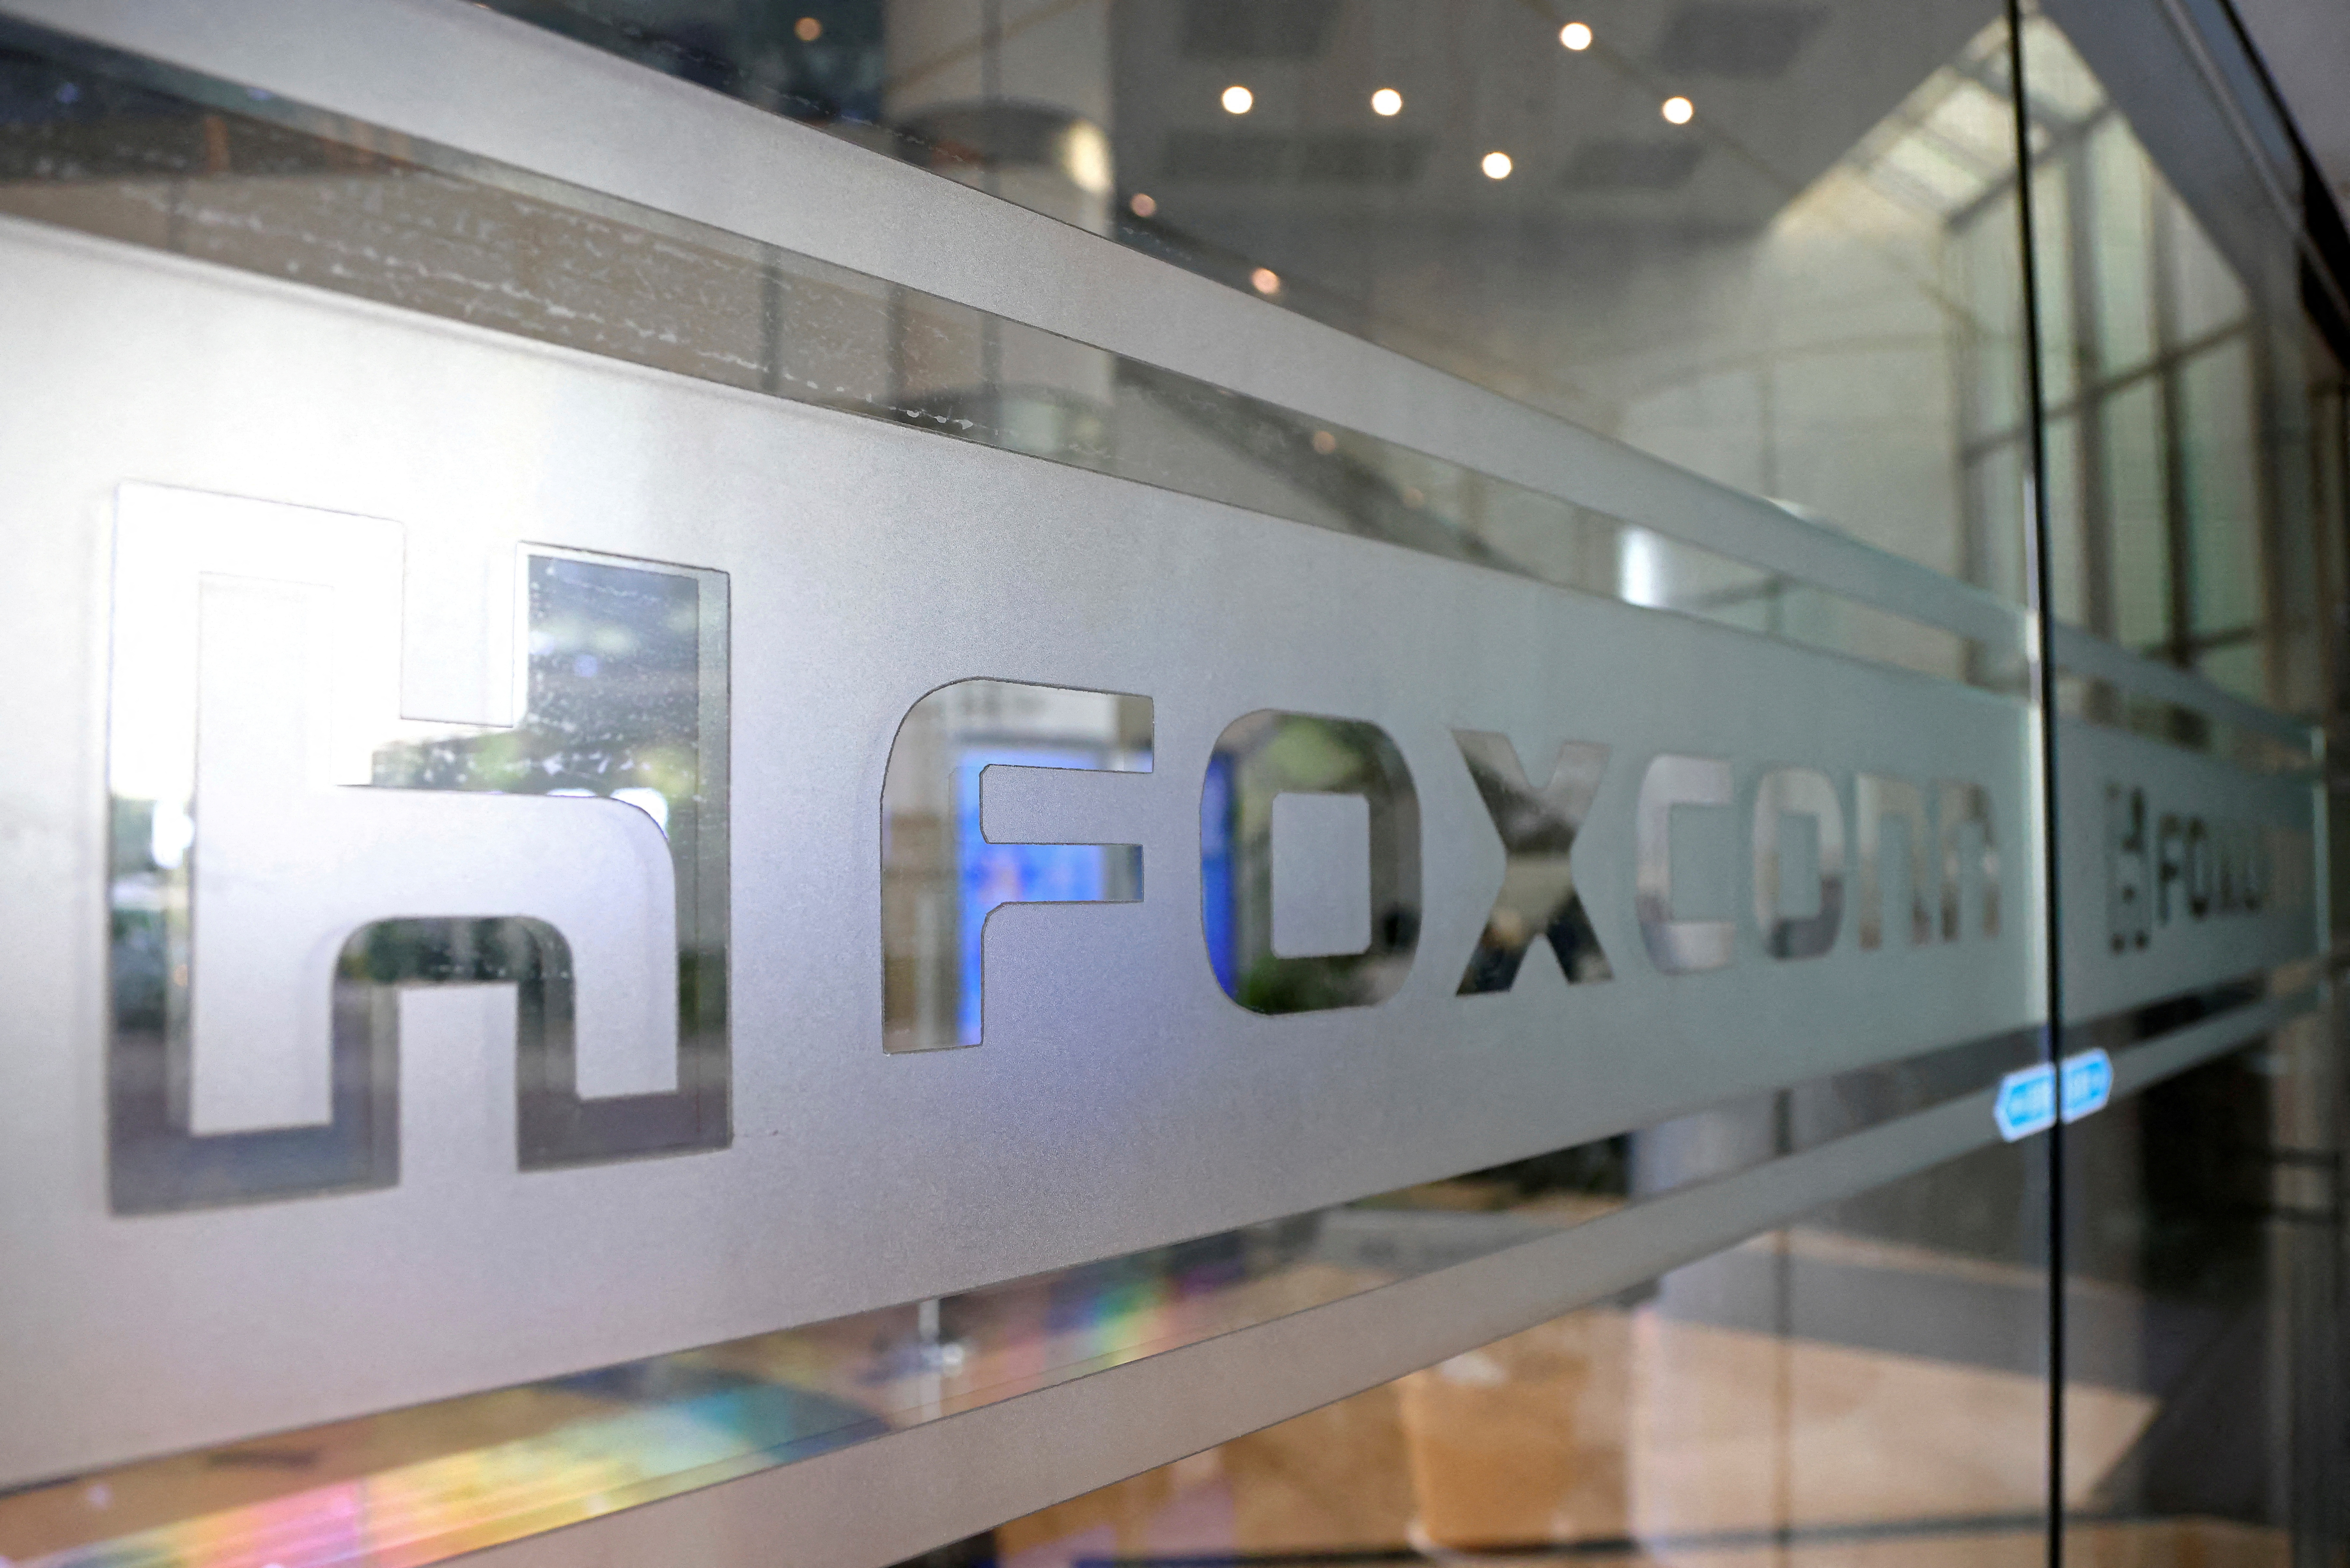 The Foxconn logo appears on a glass door of an office building in Taipei.